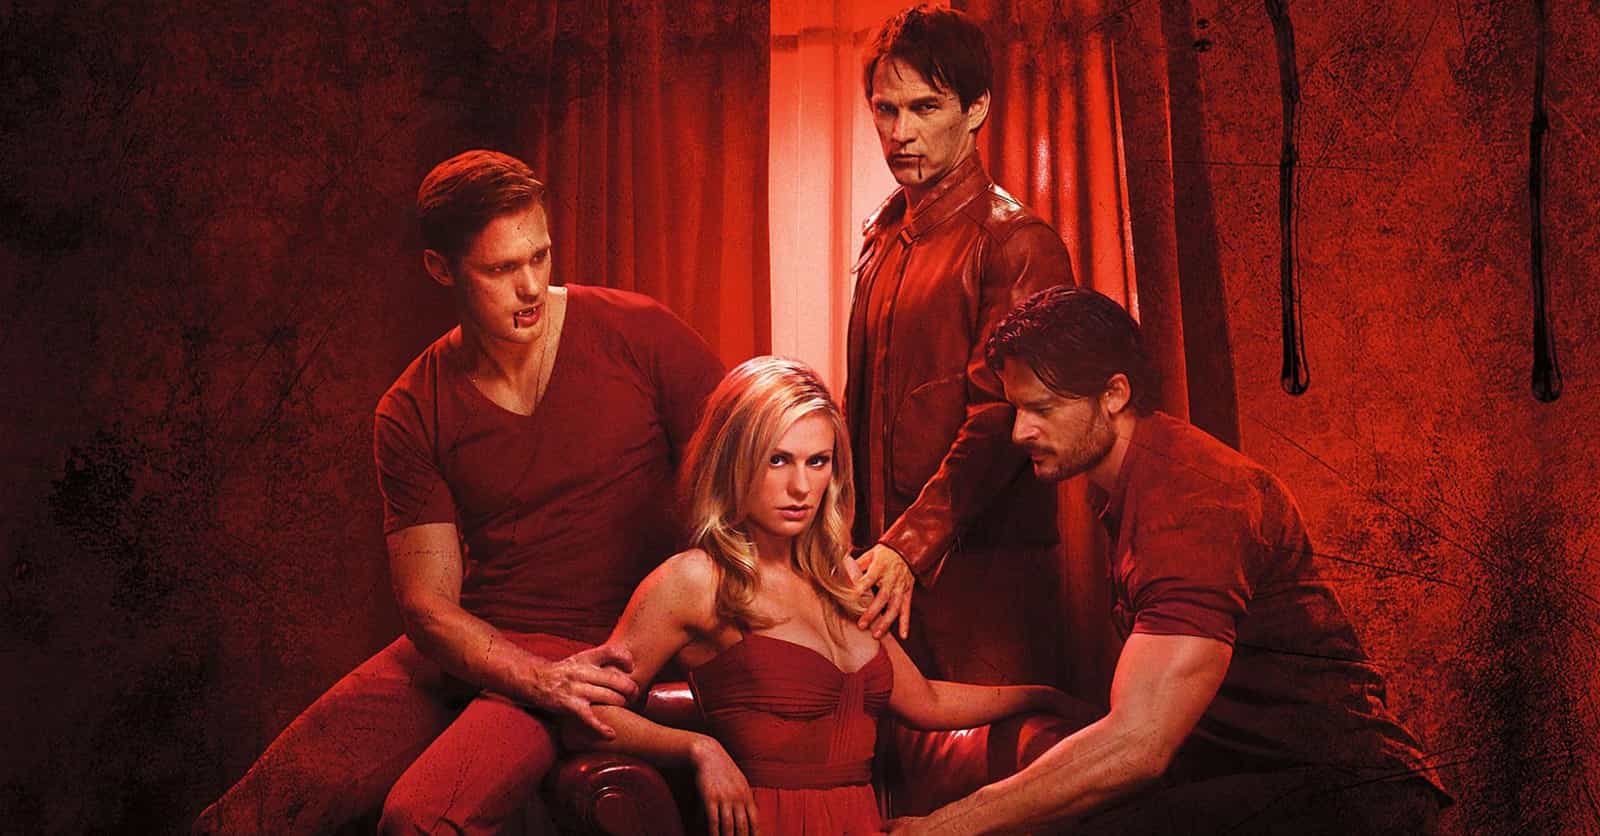 What to Watch If You Love 'True Blood'